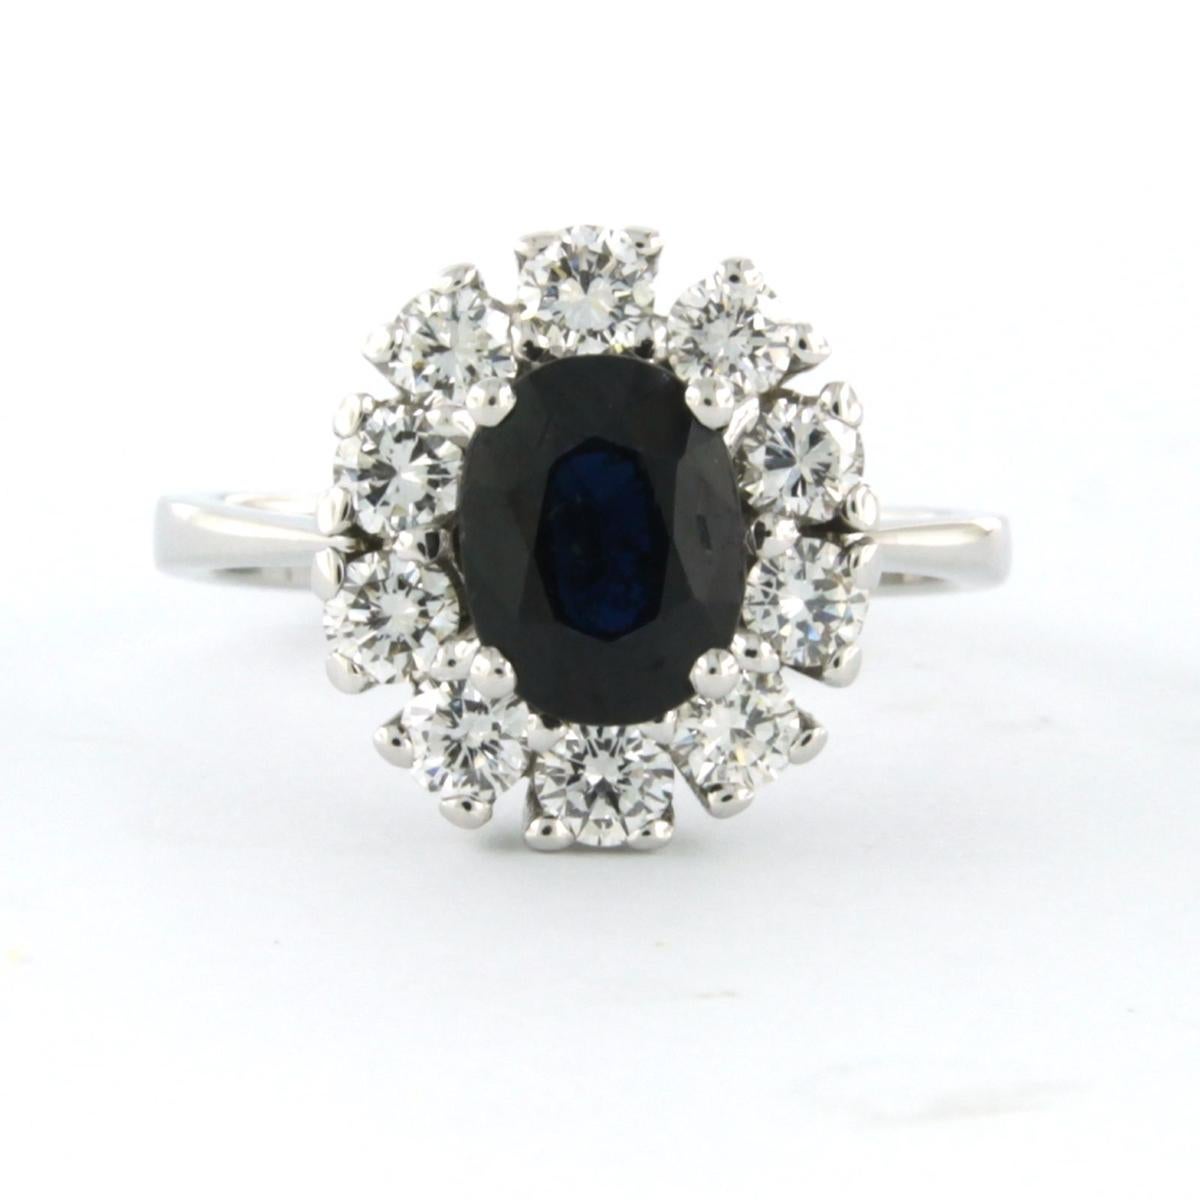 Beautiful modern ring in 18 kt white gold, with sapphire surrounded by ten brilliant cut diamonds.

Total diamond 0.90 carat, colour F/G clarity VS

One sapphire approx. 1.05 carat, dark blue colour

Weight of the ring is  5.1 gr

Height 1.4 cm